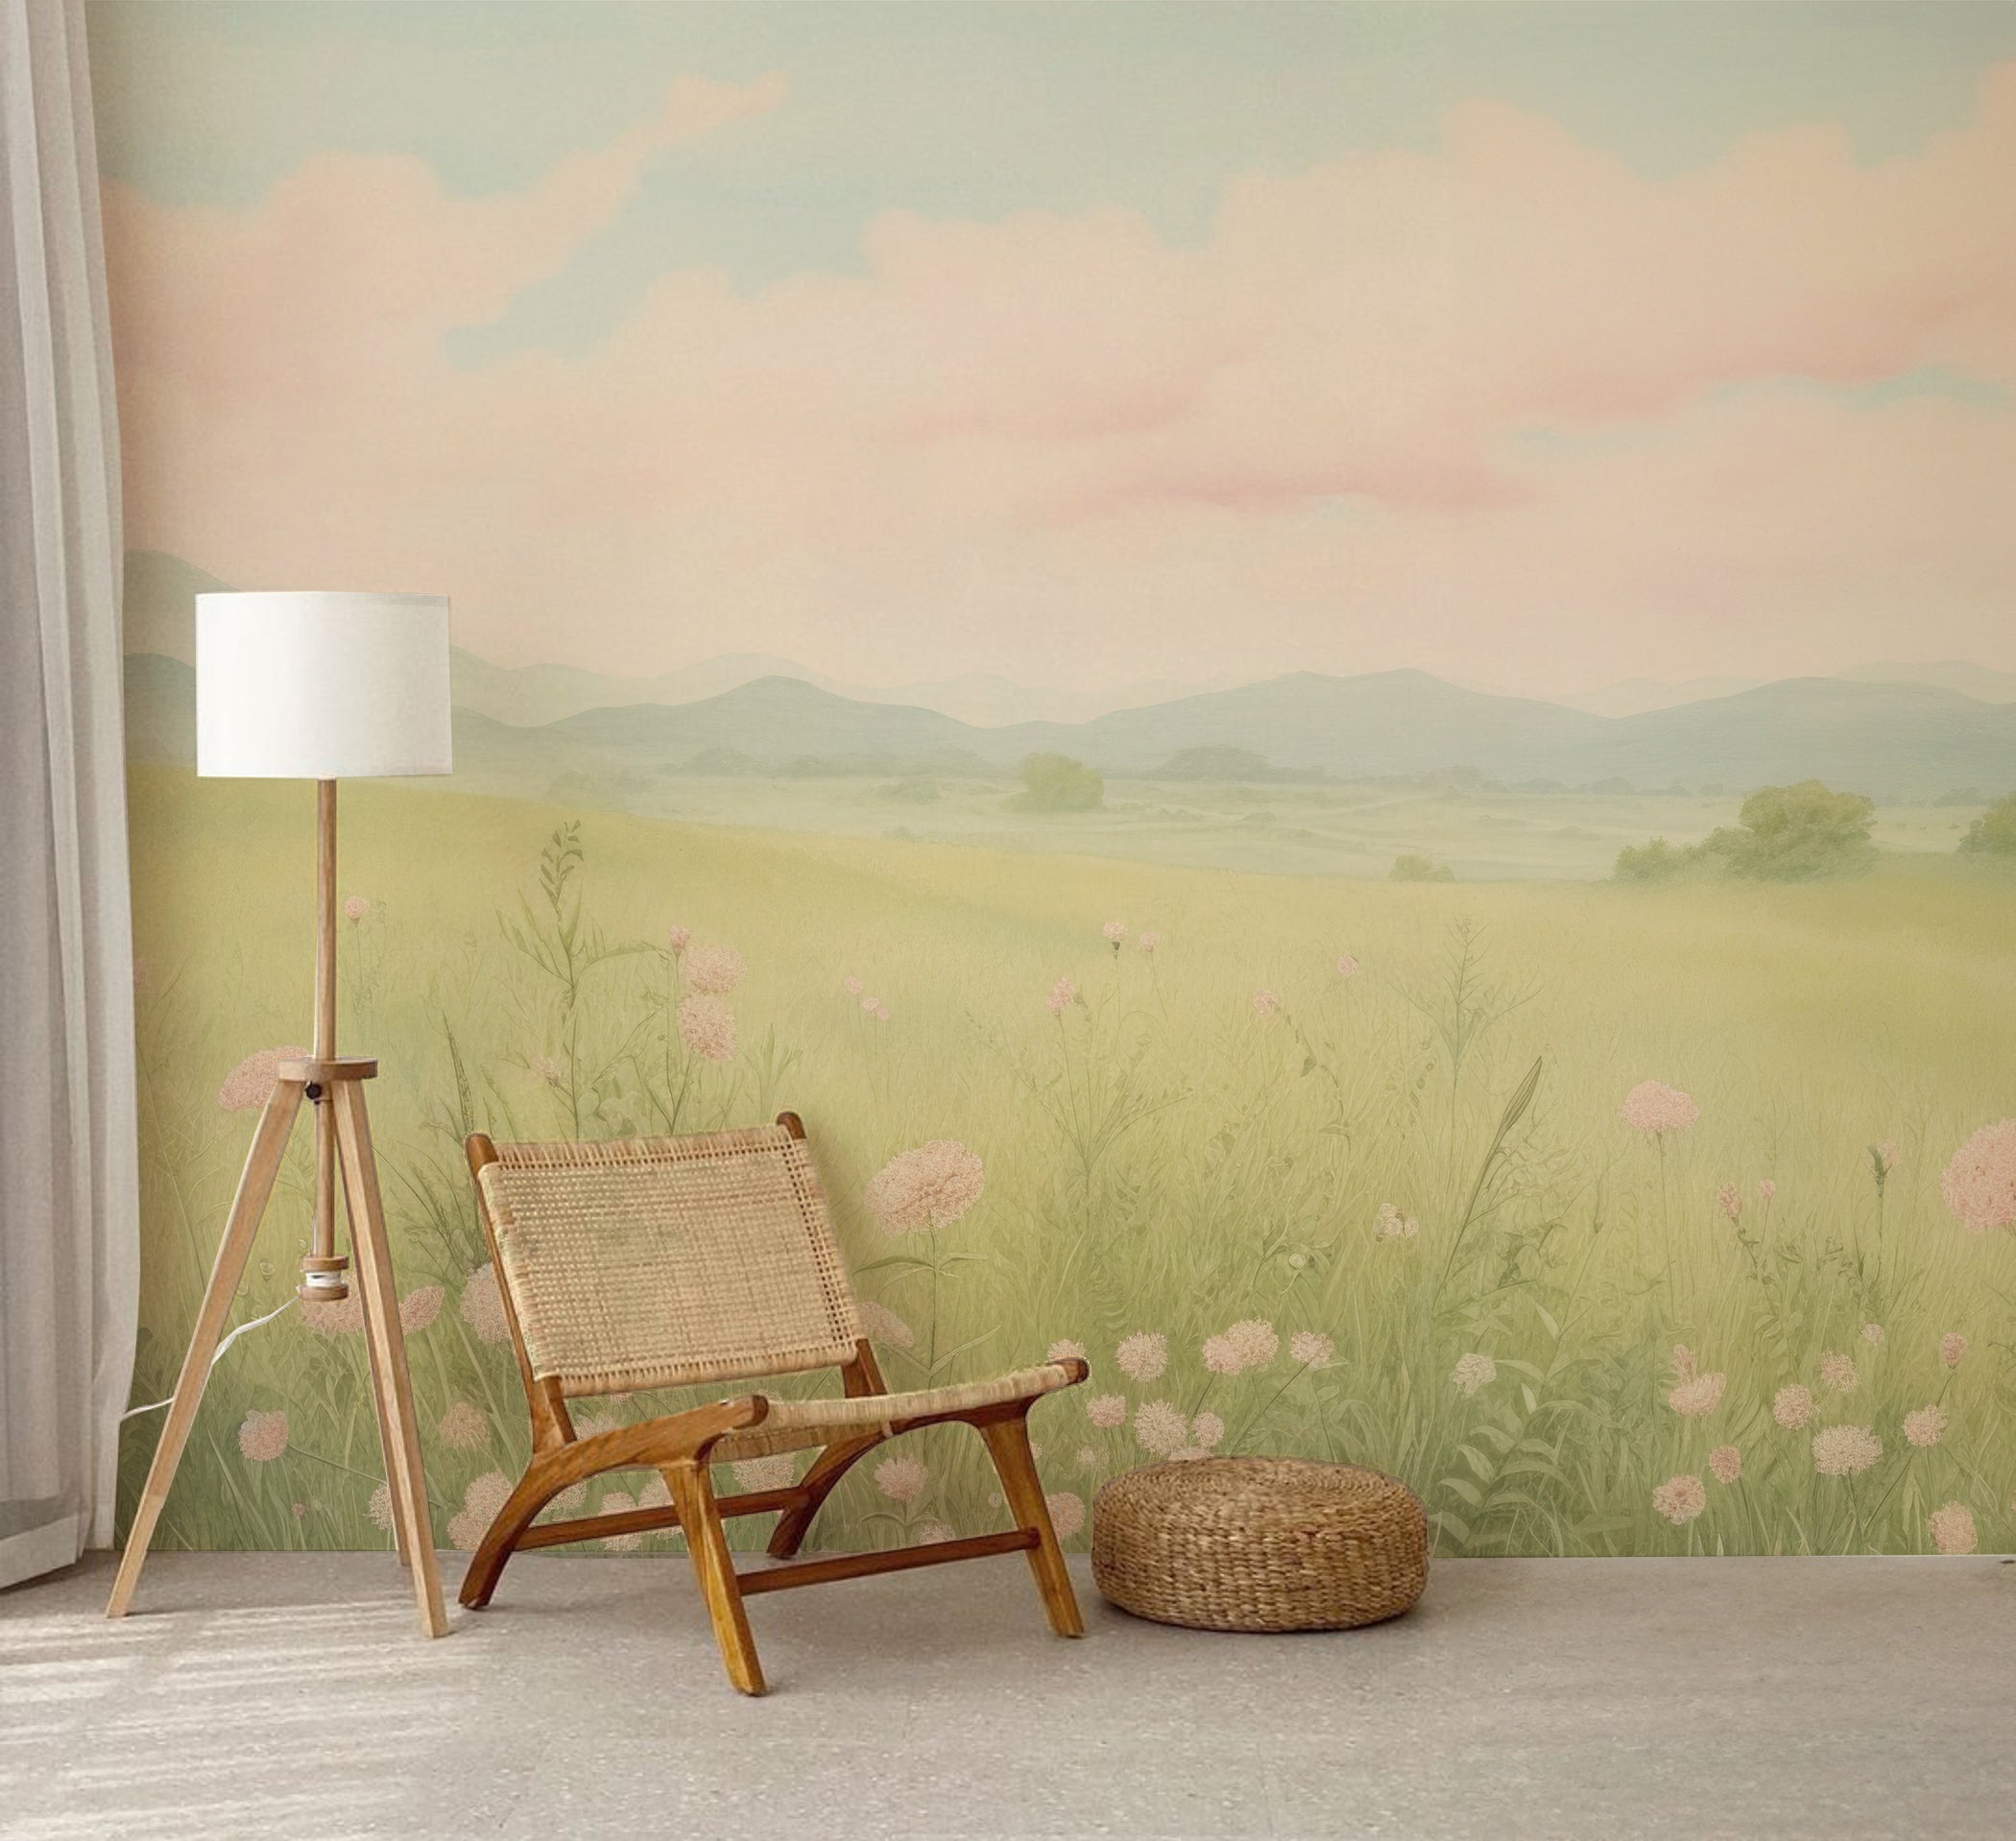 "Soothing Countryside Wallpaper in Reading Nook with Comfortable Armchair and Natural Light"